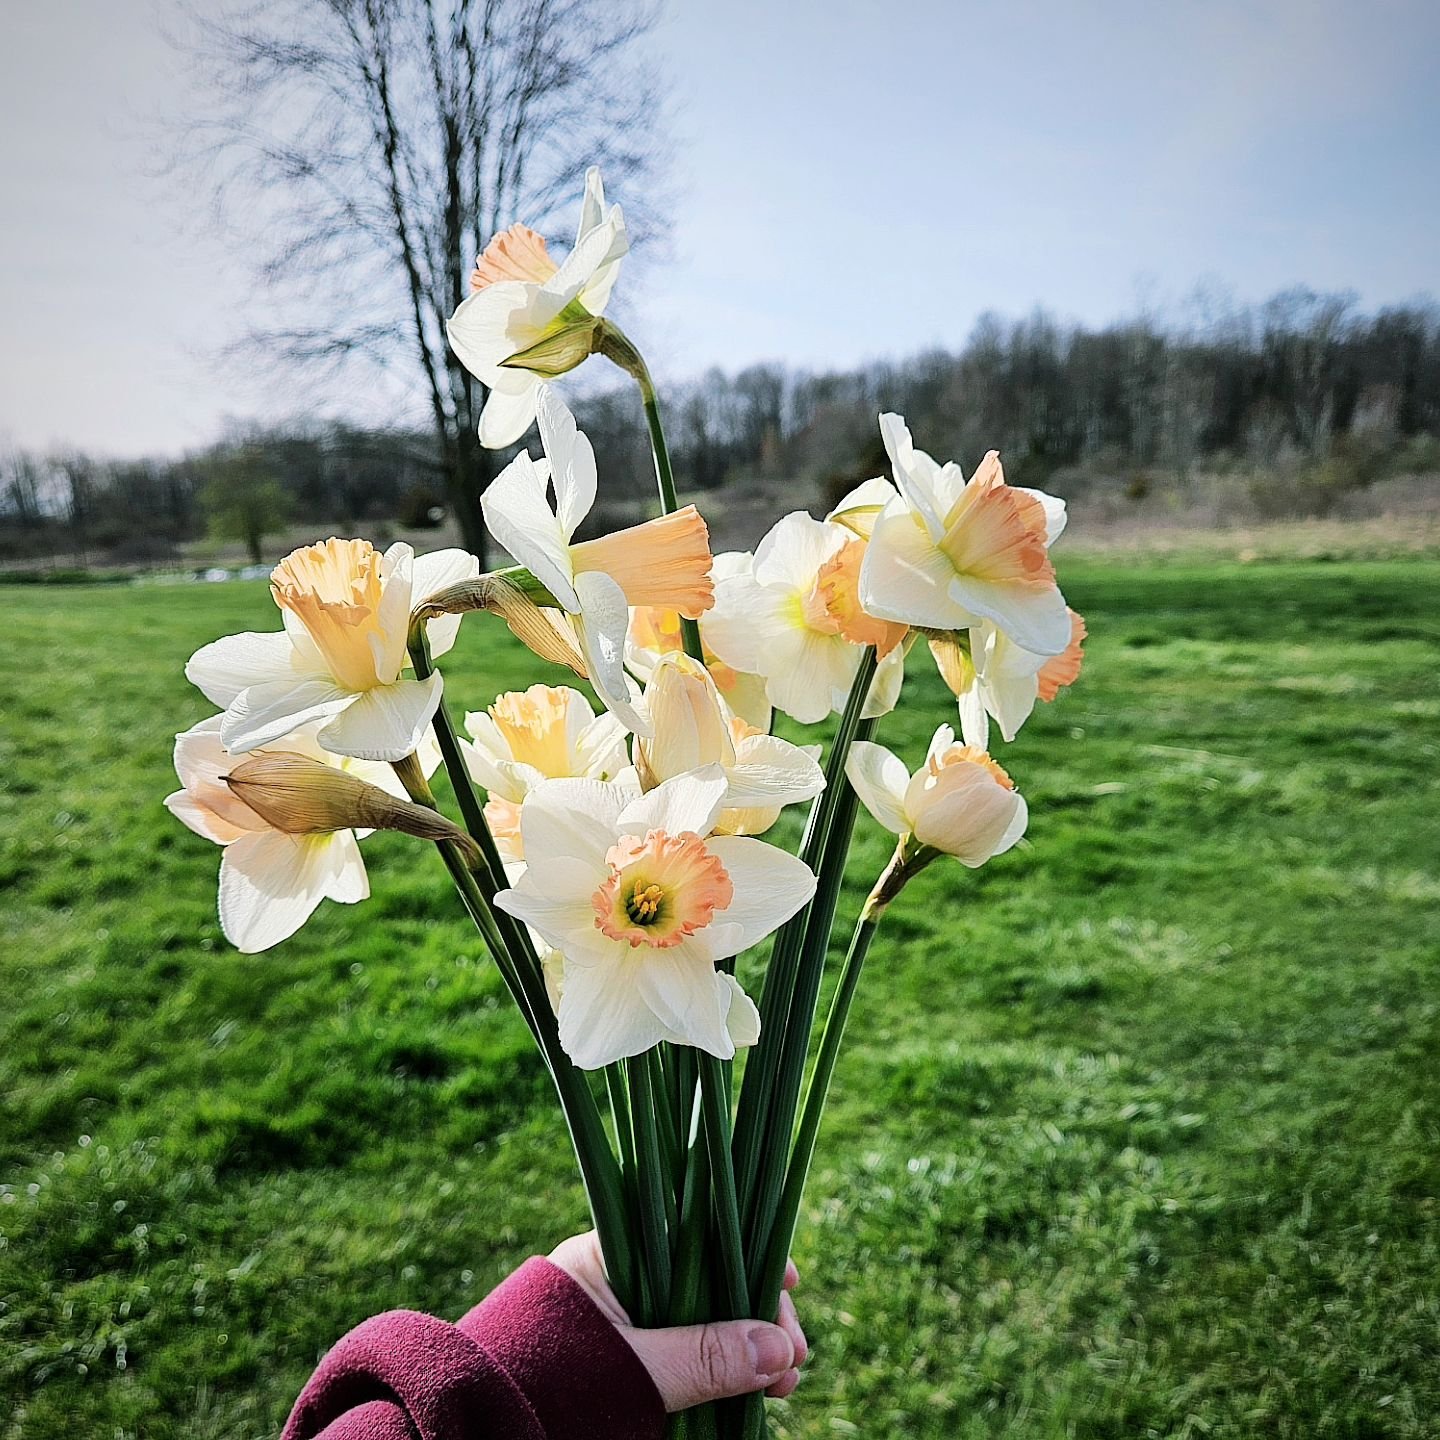 Daffodils... spring's unsung hero.  We love them so much around here!

The daffs have been in the ground for 5 years, and I still get so many blooms. Every season, I say I'm going to dig them up and separate the bulbs, but I never do... and they have